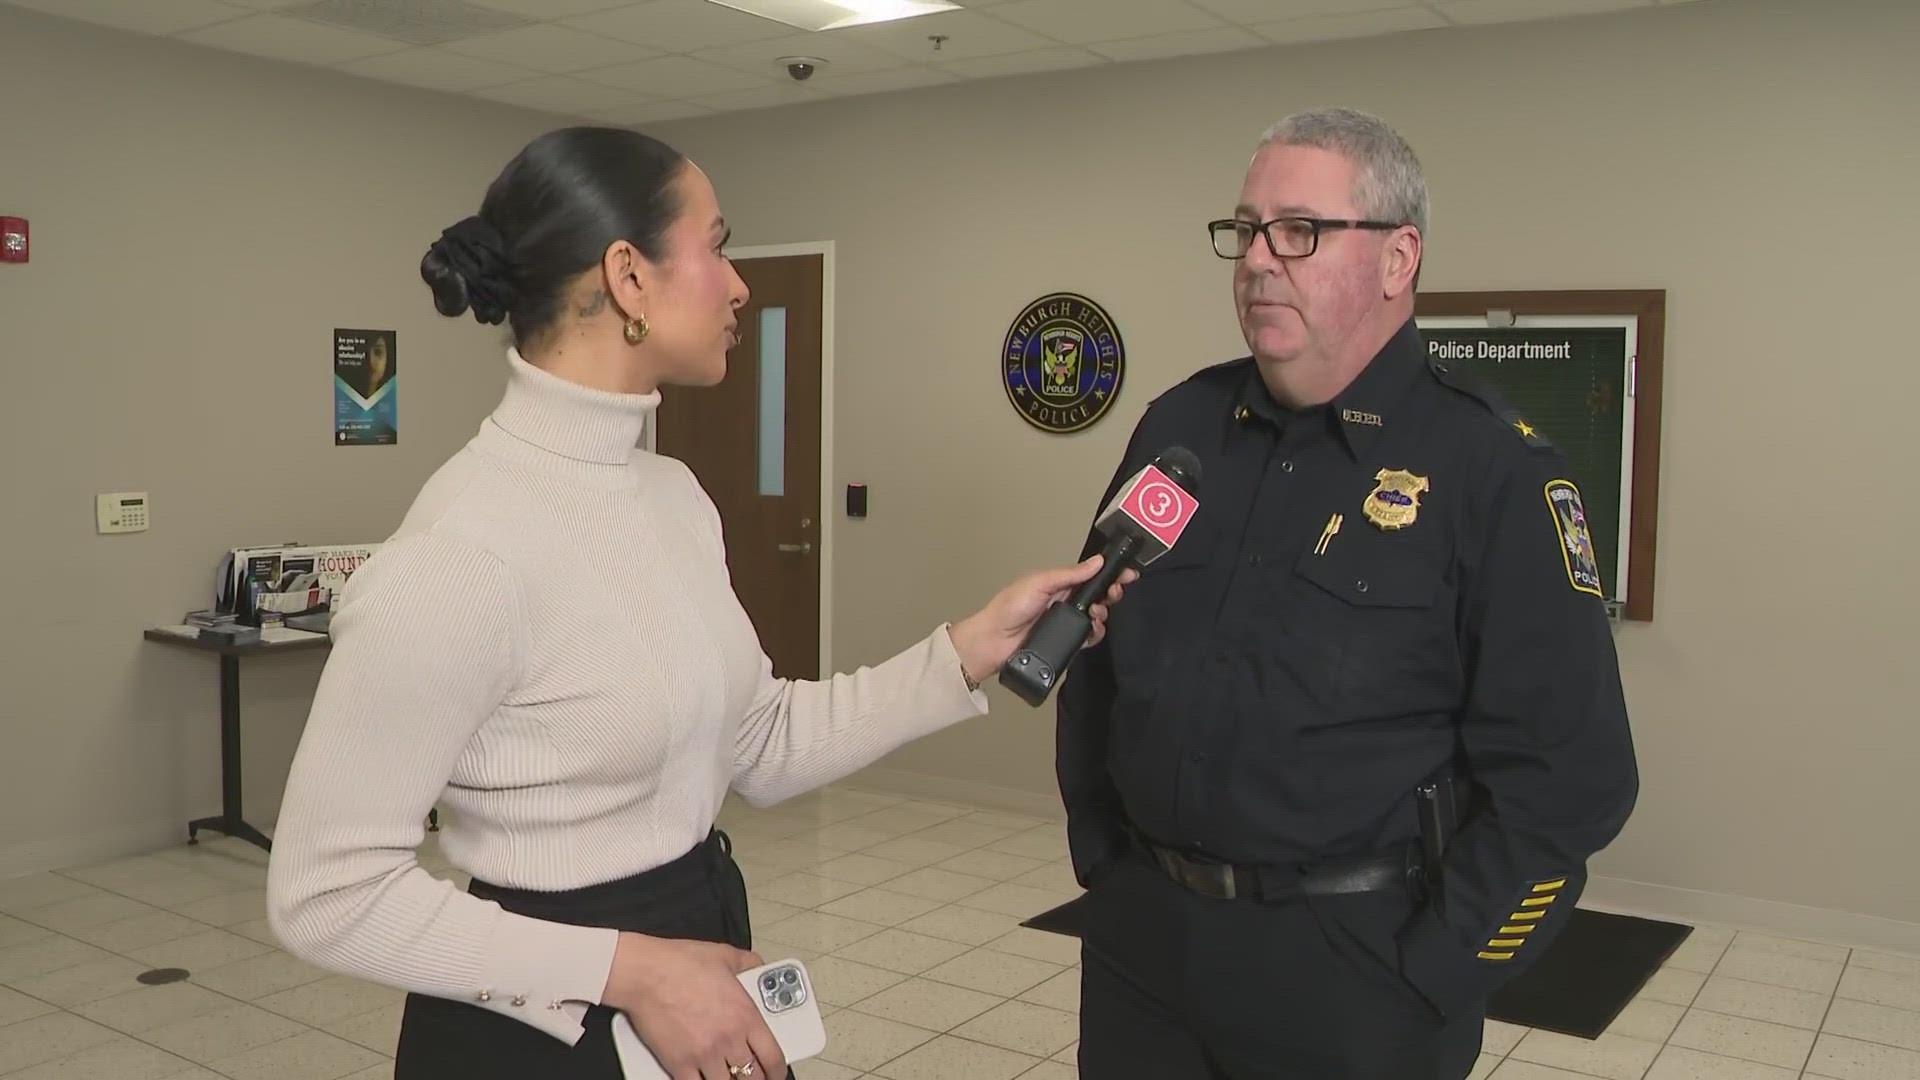 Newburgh Heights Police Chief John Major, who also works with nonprofit Cleveland Missing, gives an update on how the Amber Alert process works.